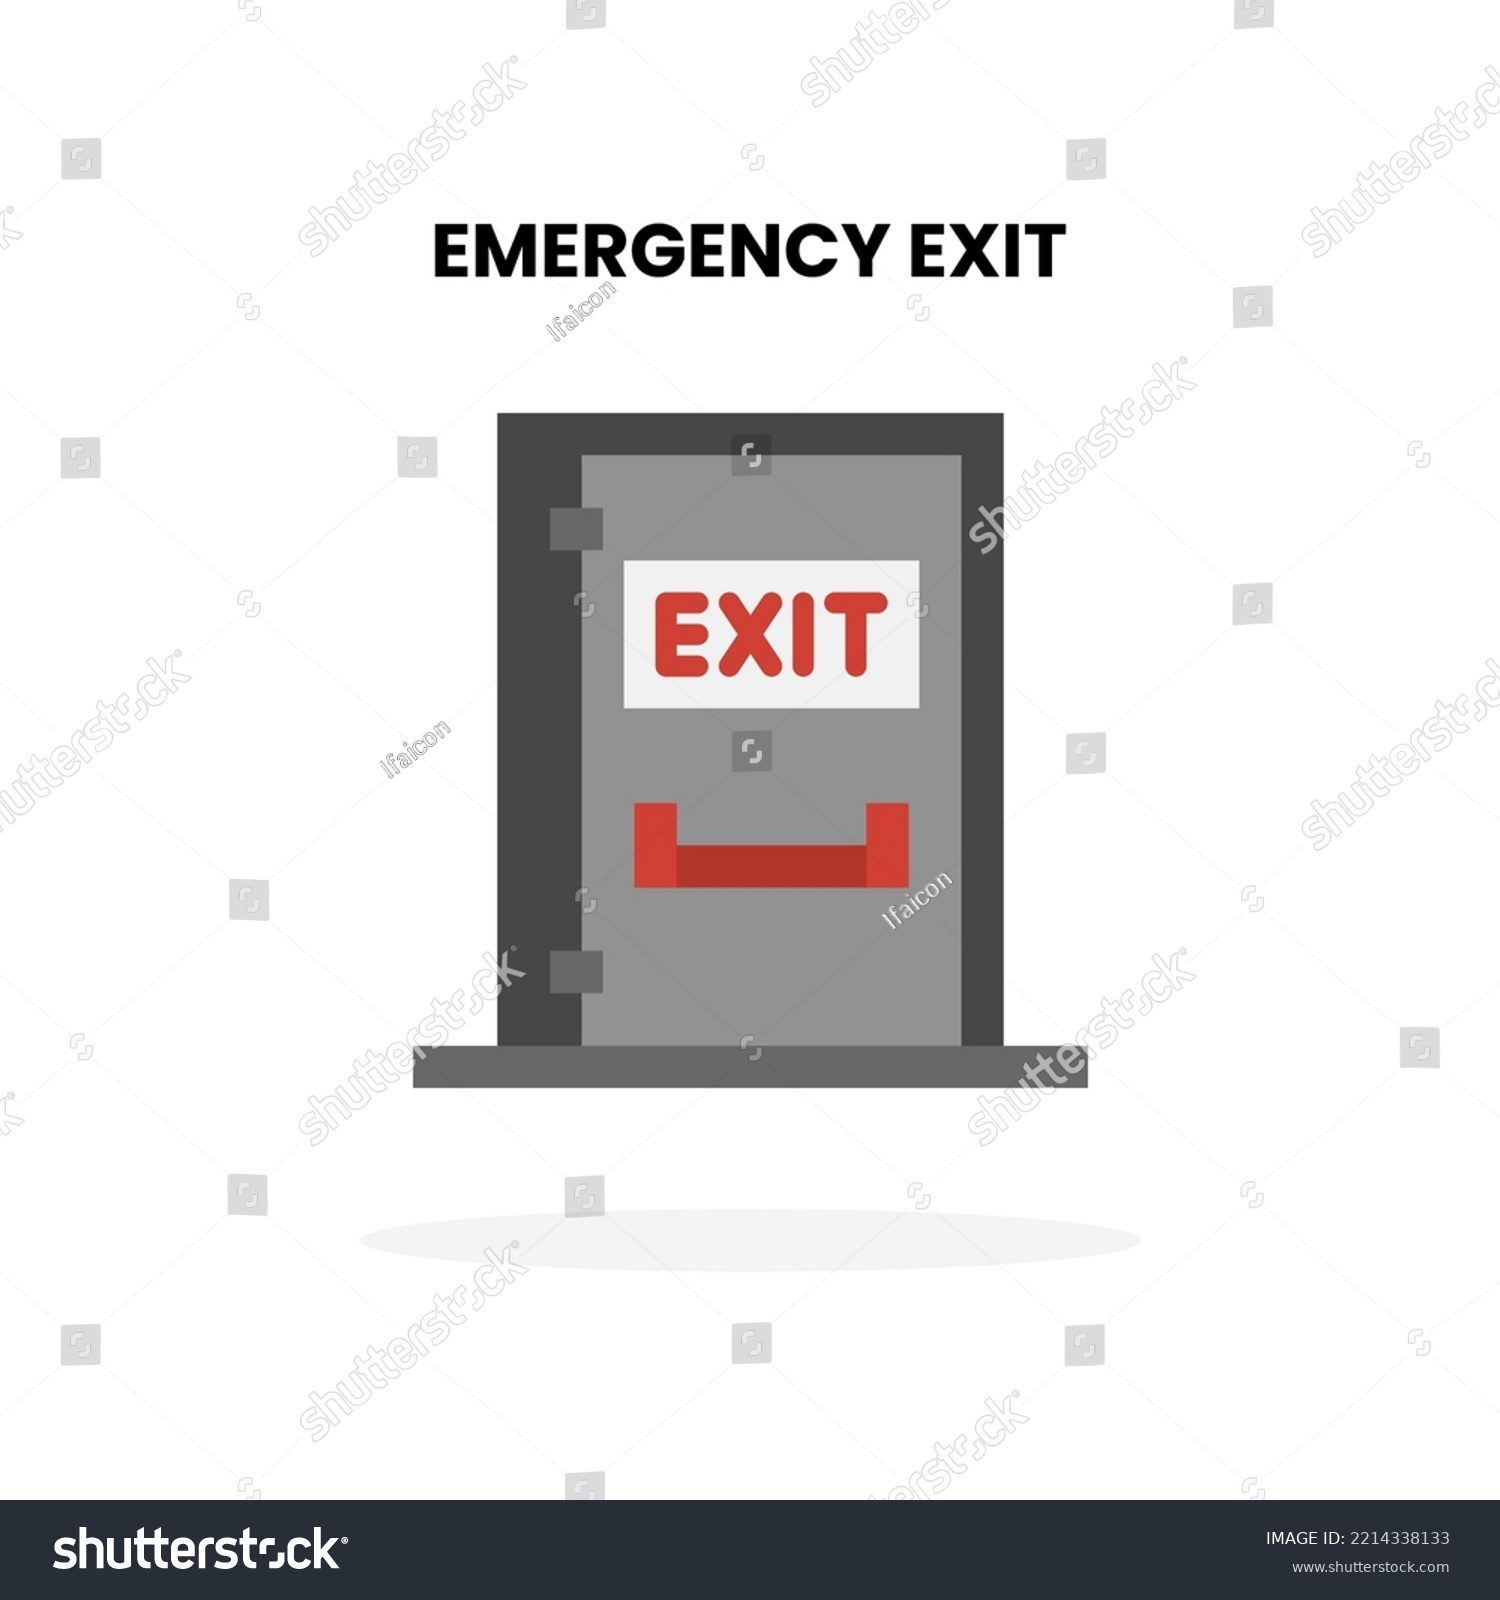 SVG of Exit Door Emergency flat icon. Vector illustration on white background. svg